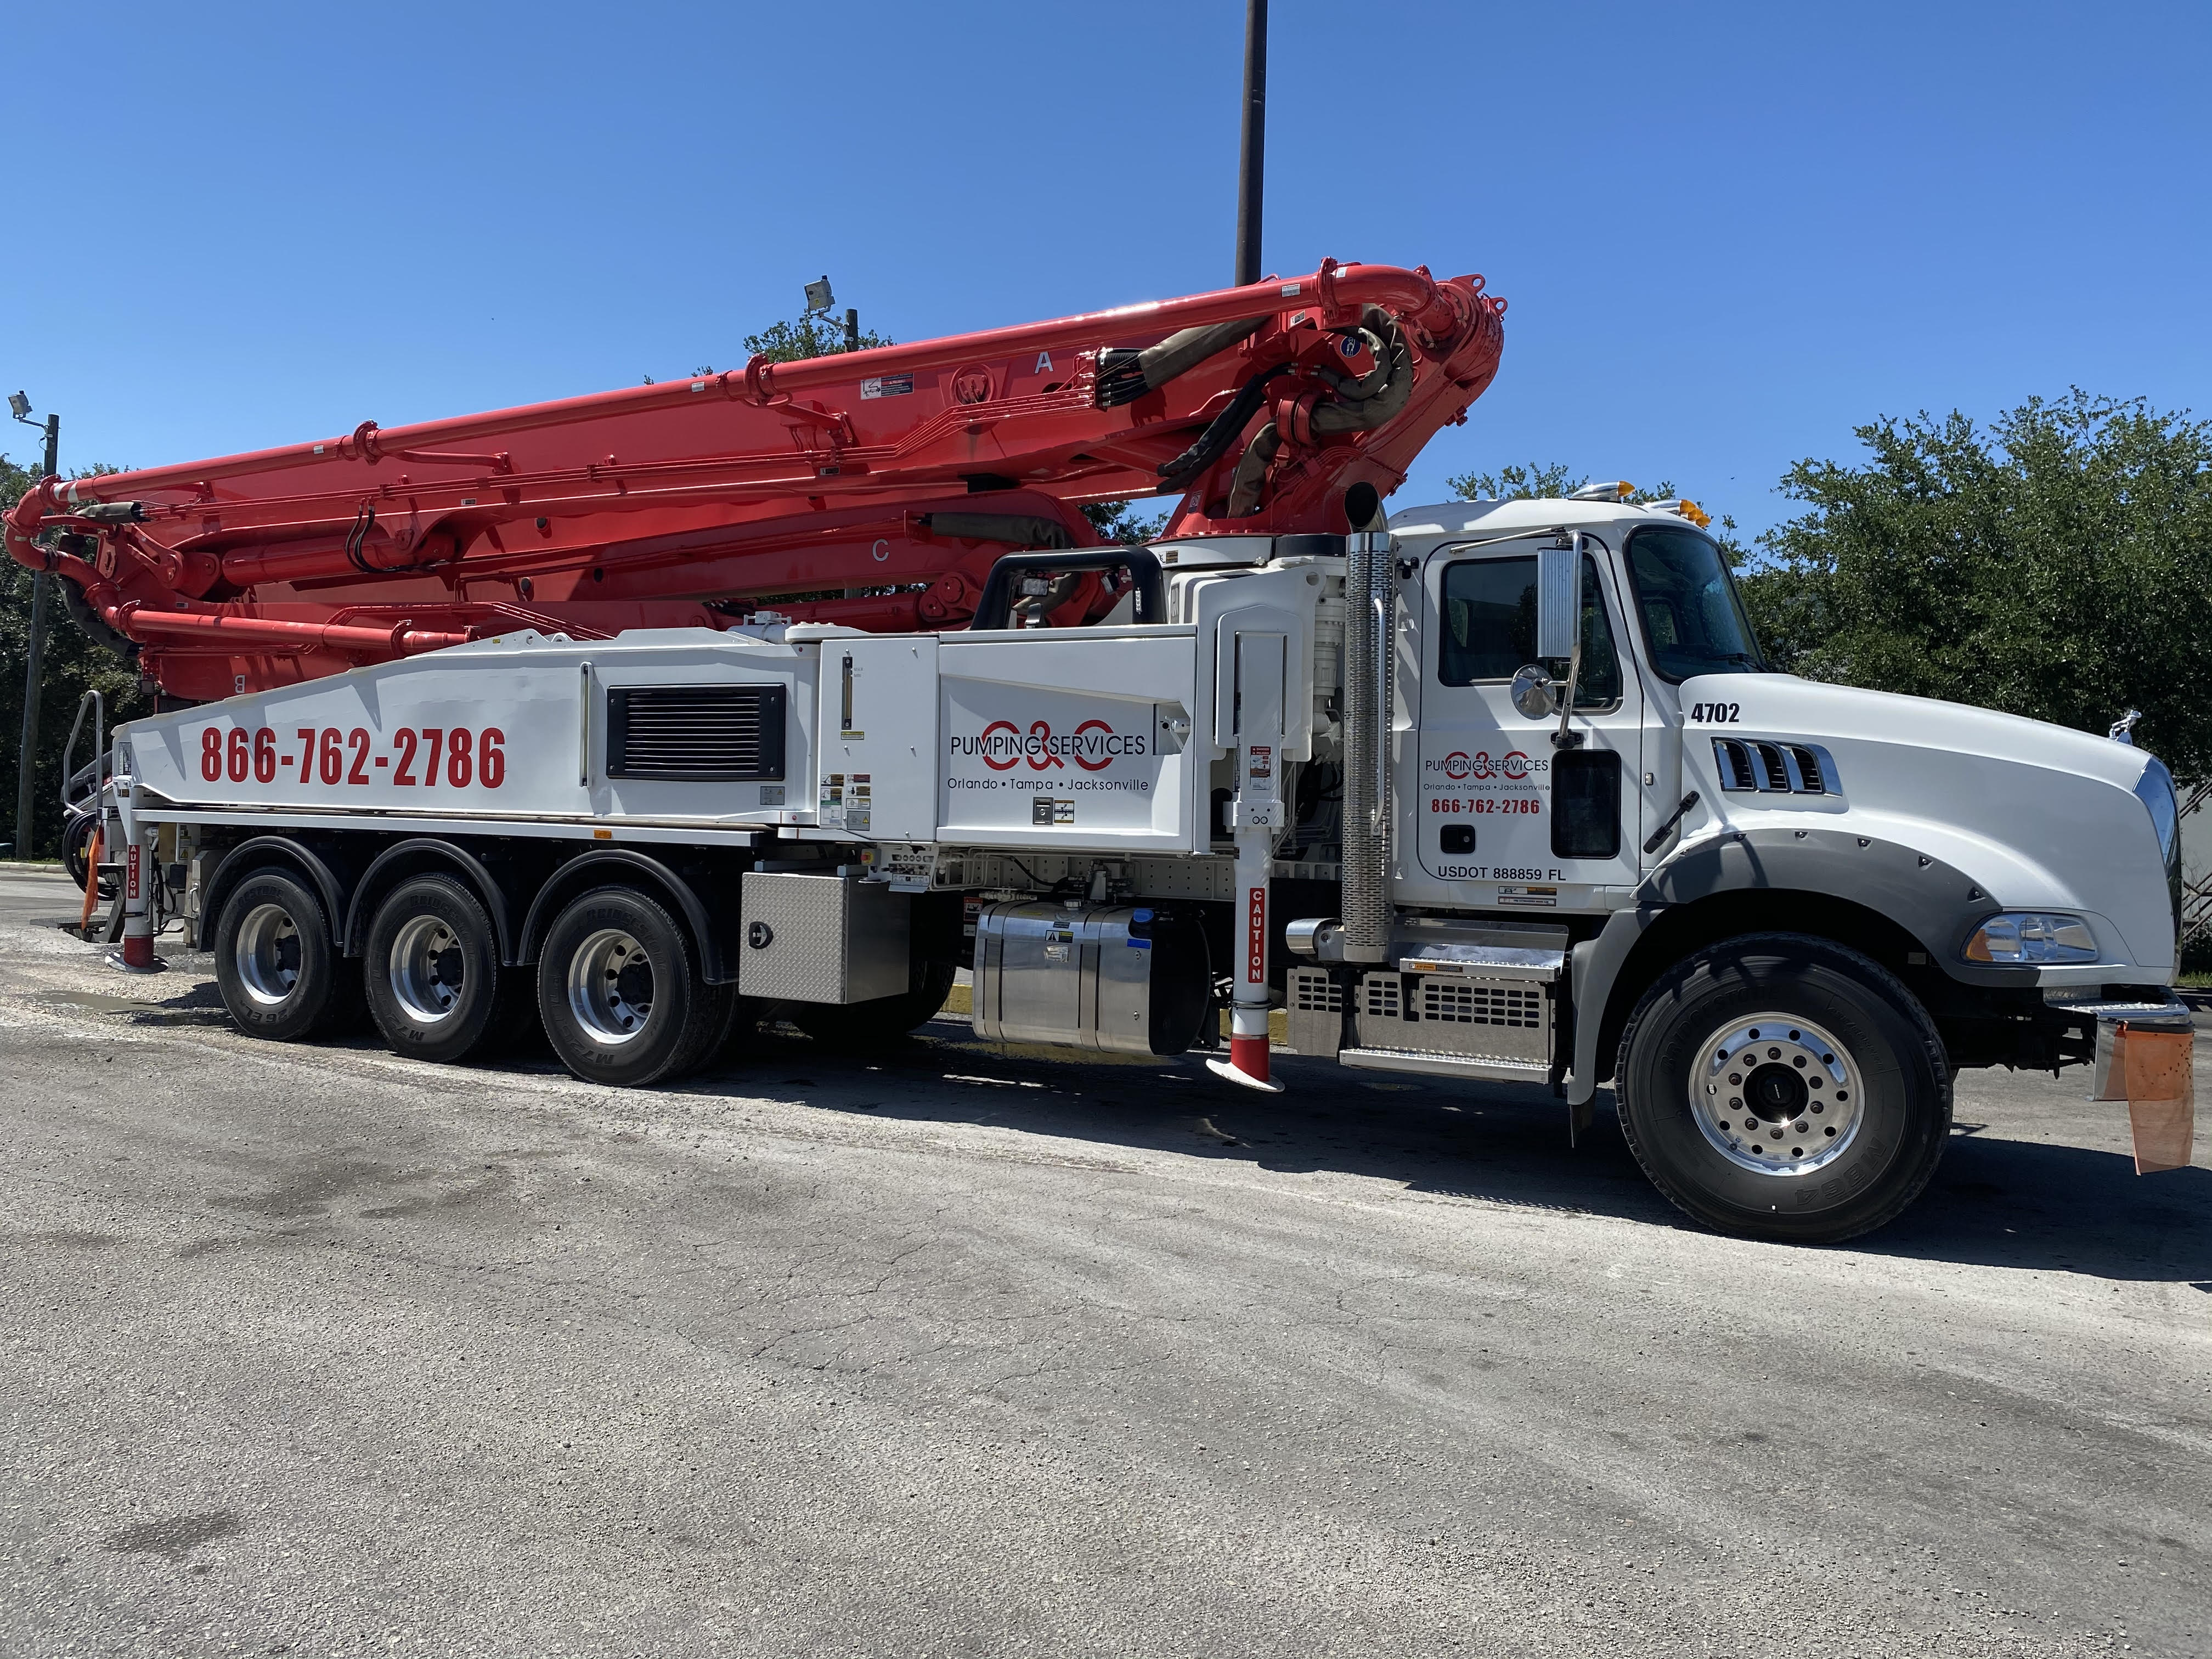 47 Meter concrete boom pump, provided by C&C Pumping Services Inc. 